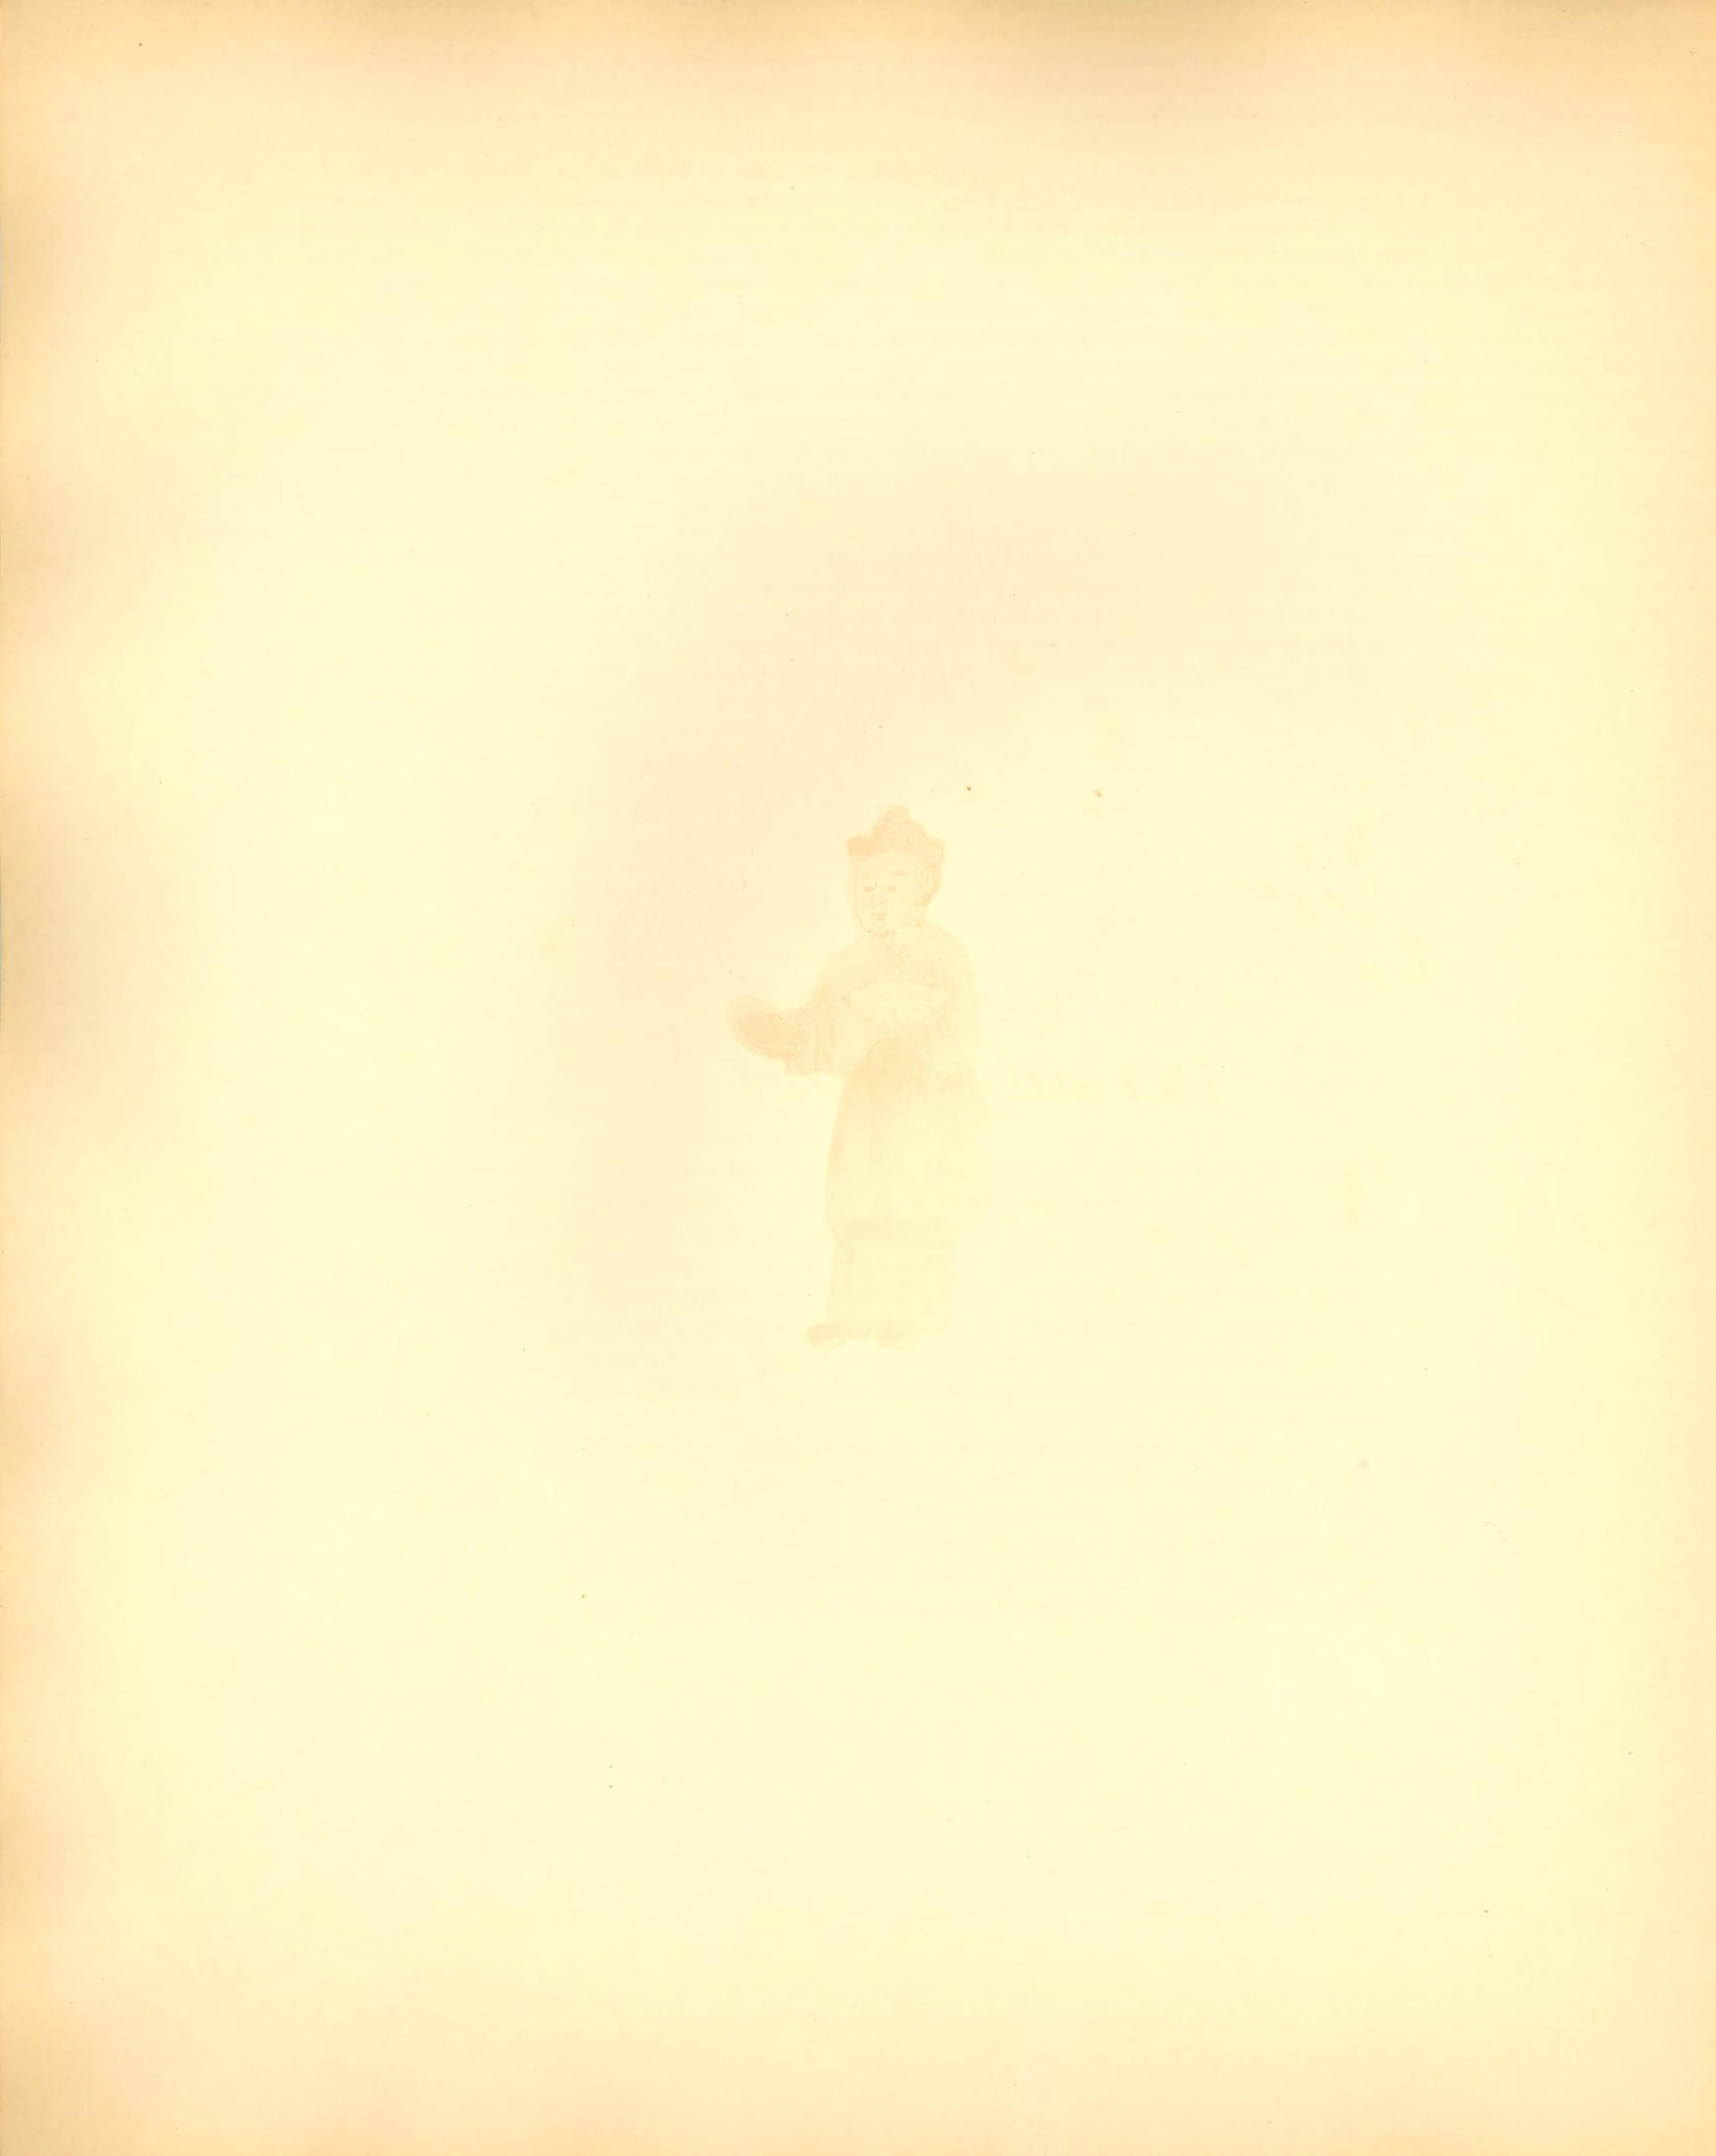 Pendleton Collection Catalog Page: blank page with offset image of a 18th century Chinese figure with a fan